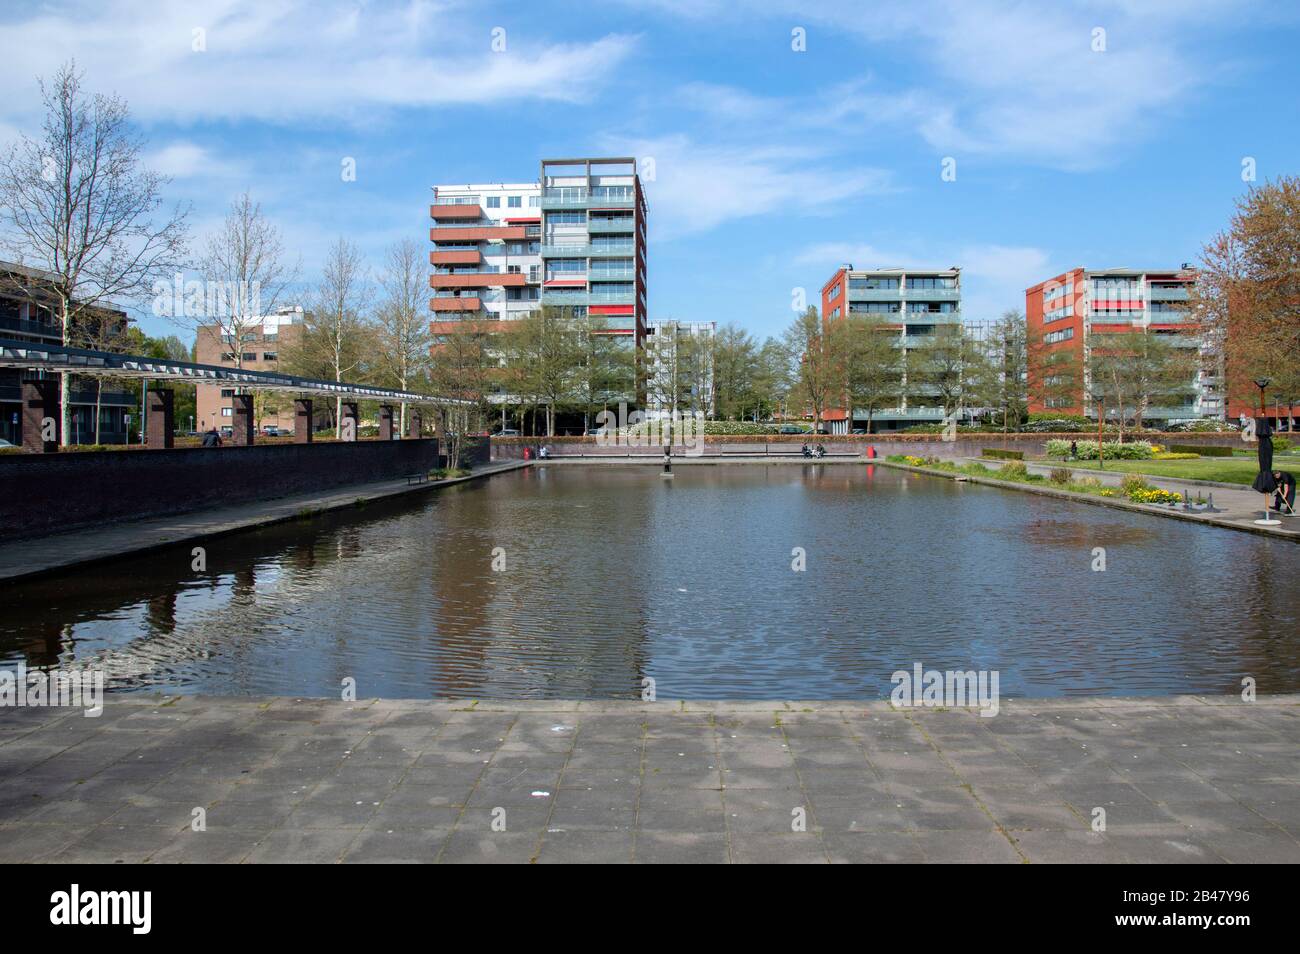 Pond At The Kokusai Restaurant And The Stadstuinen At Amstelveen The Netherlands 2019 Stock Photo